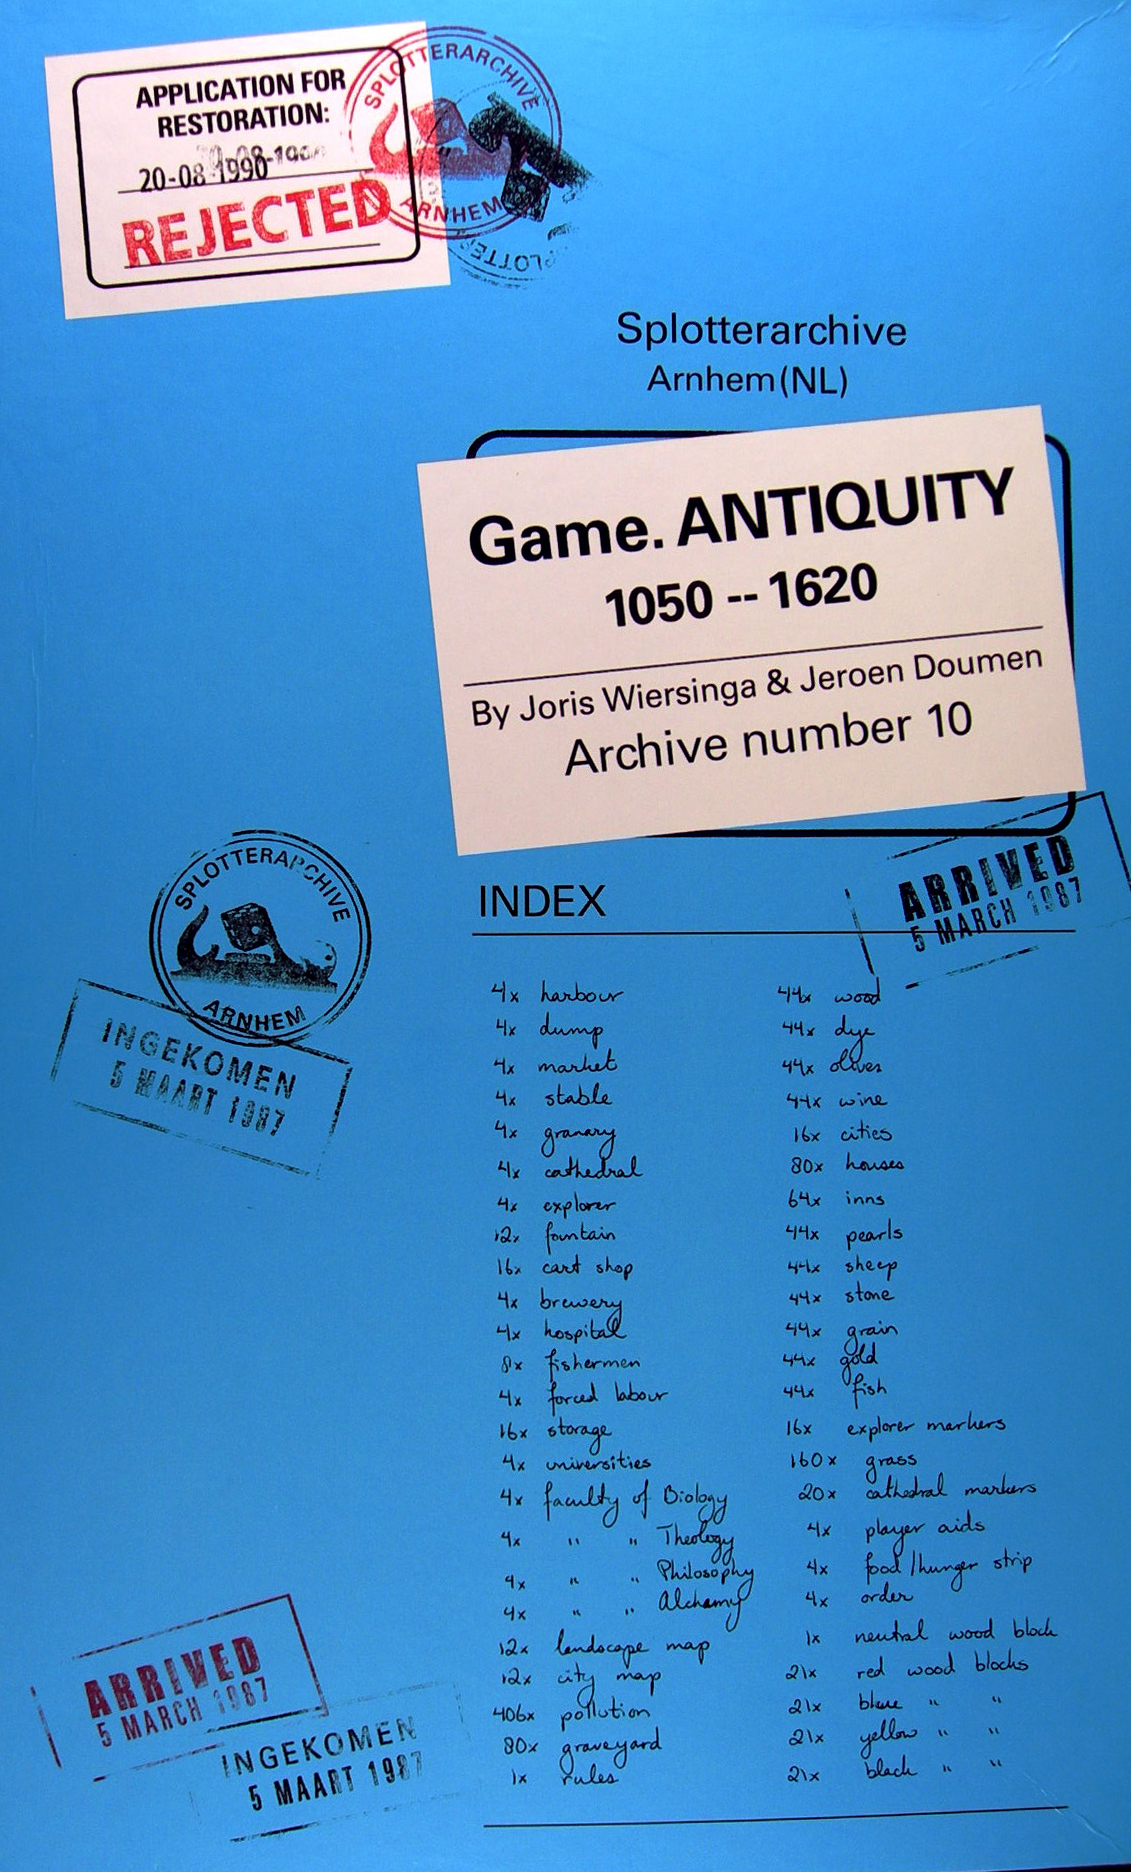 Game. Antiquity 1050 - 1620